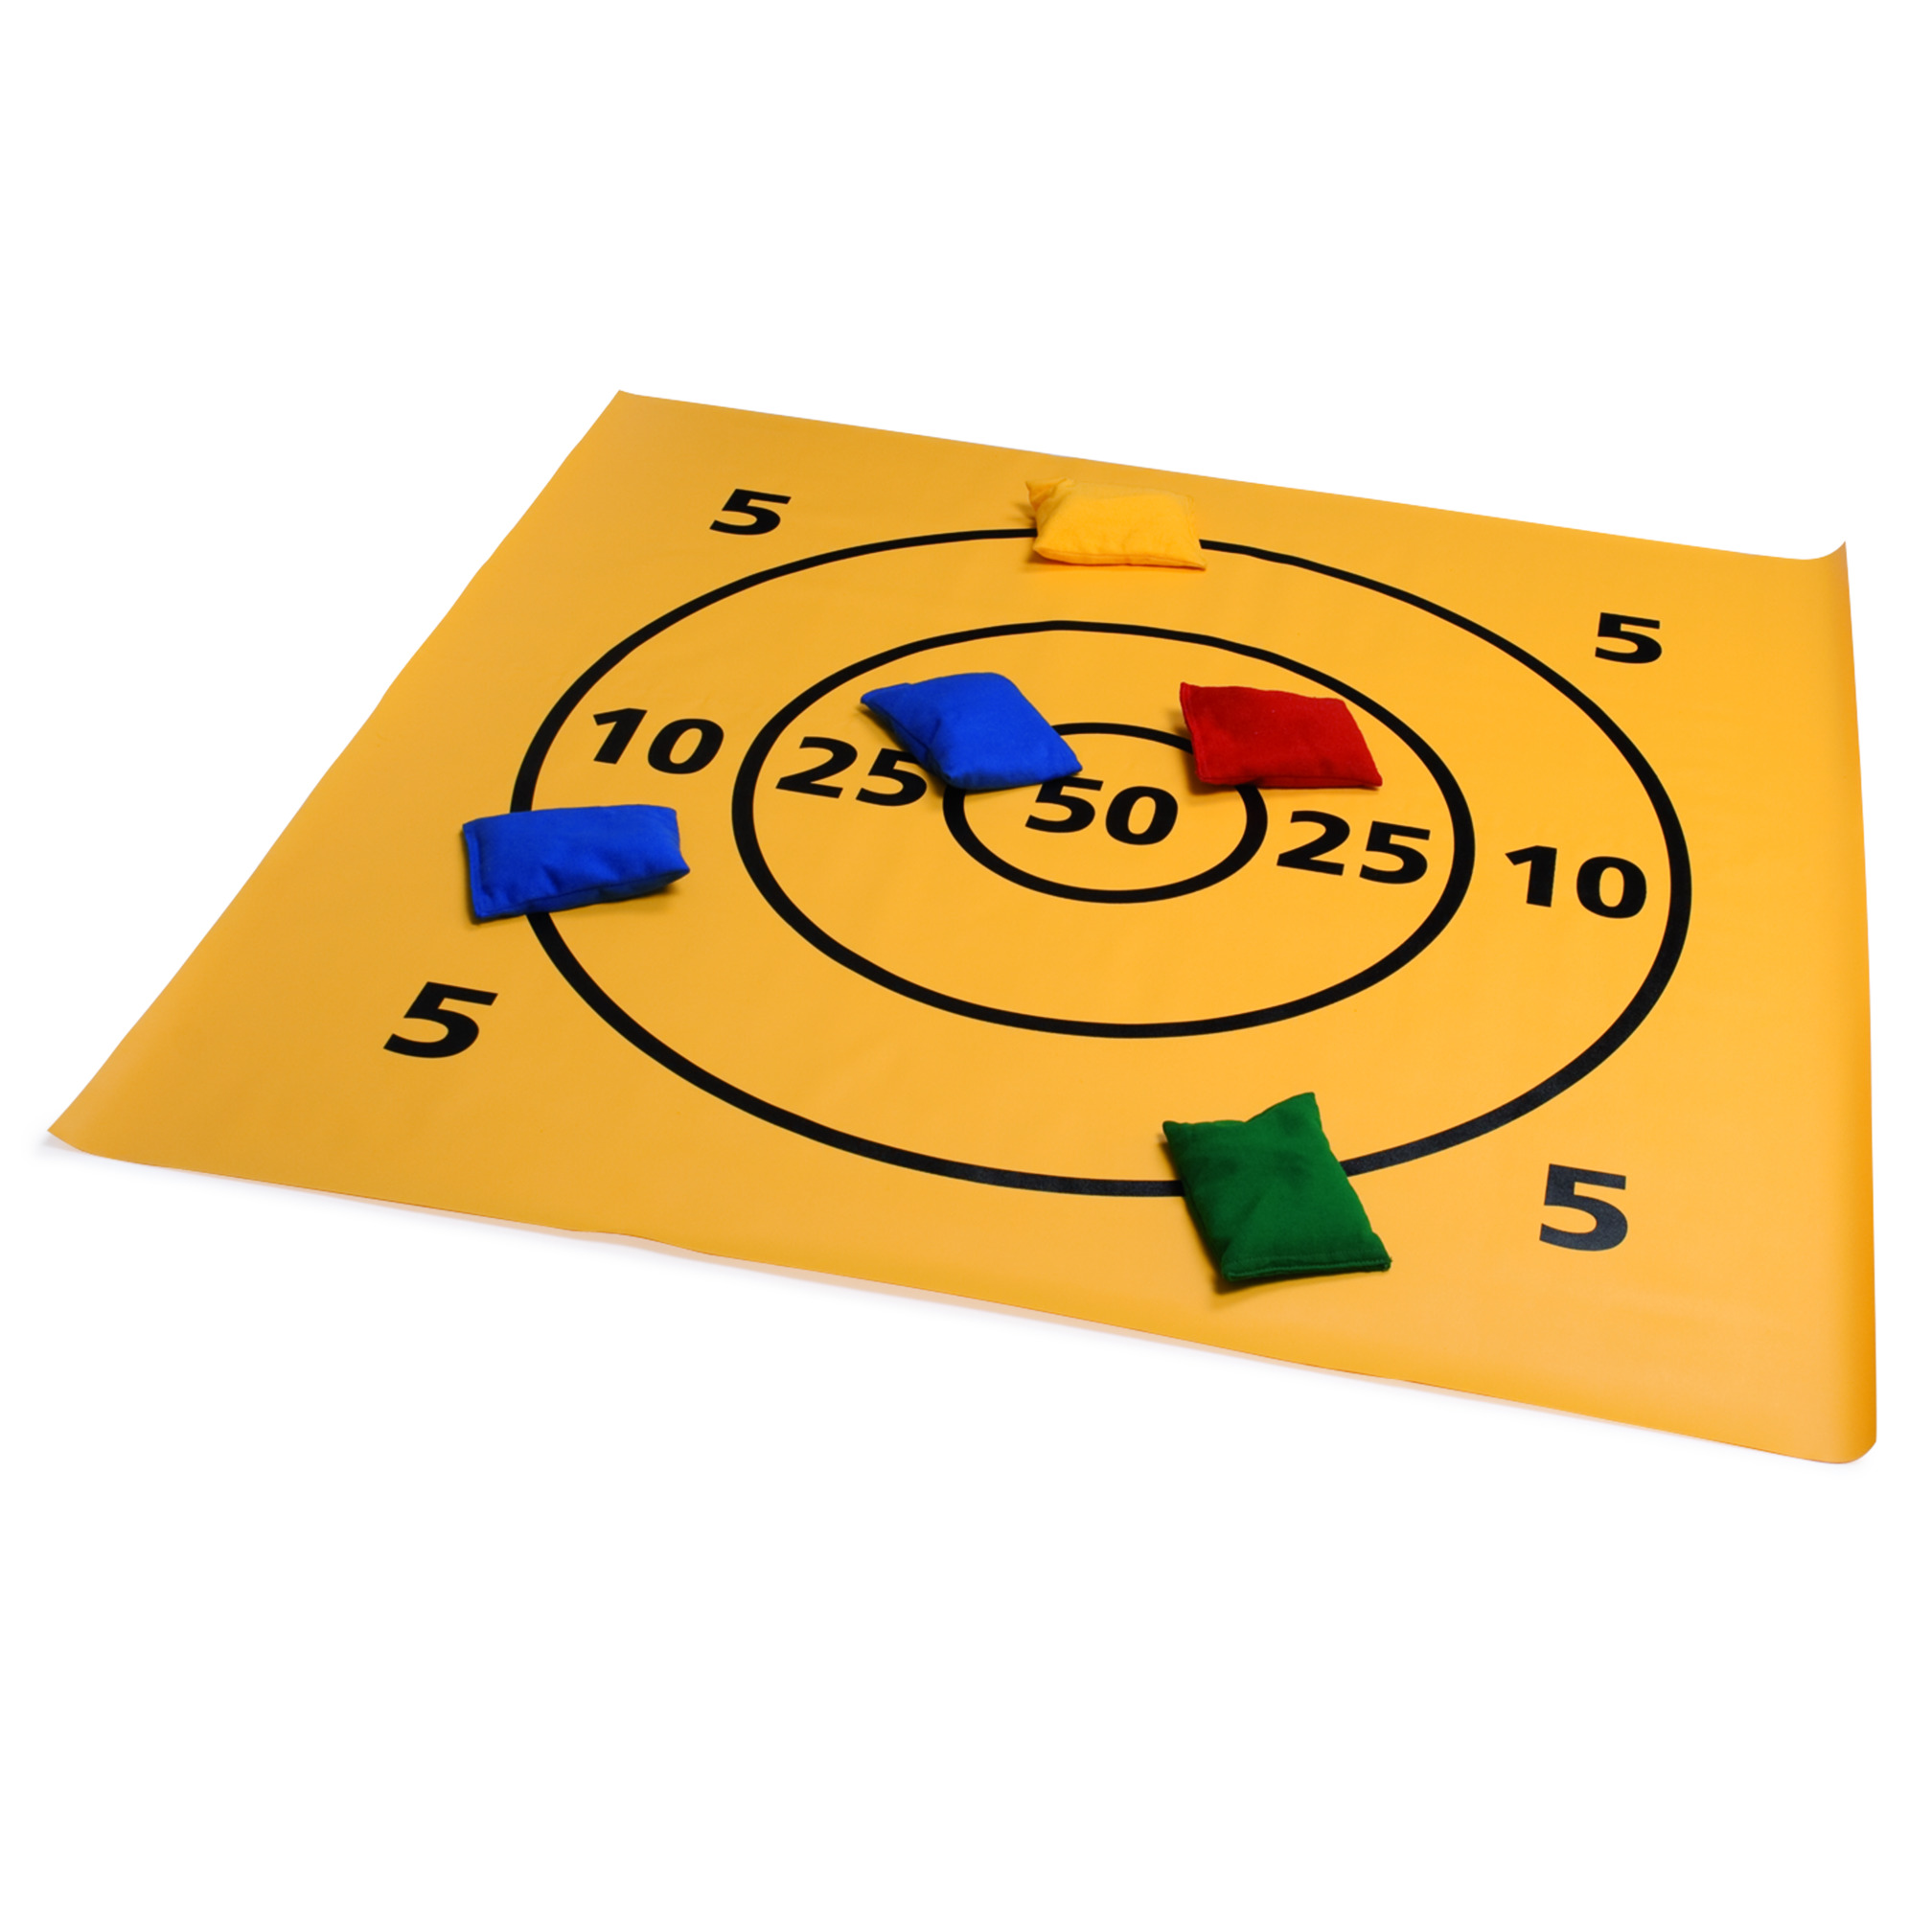 Throwing mat/Target mat with numbers